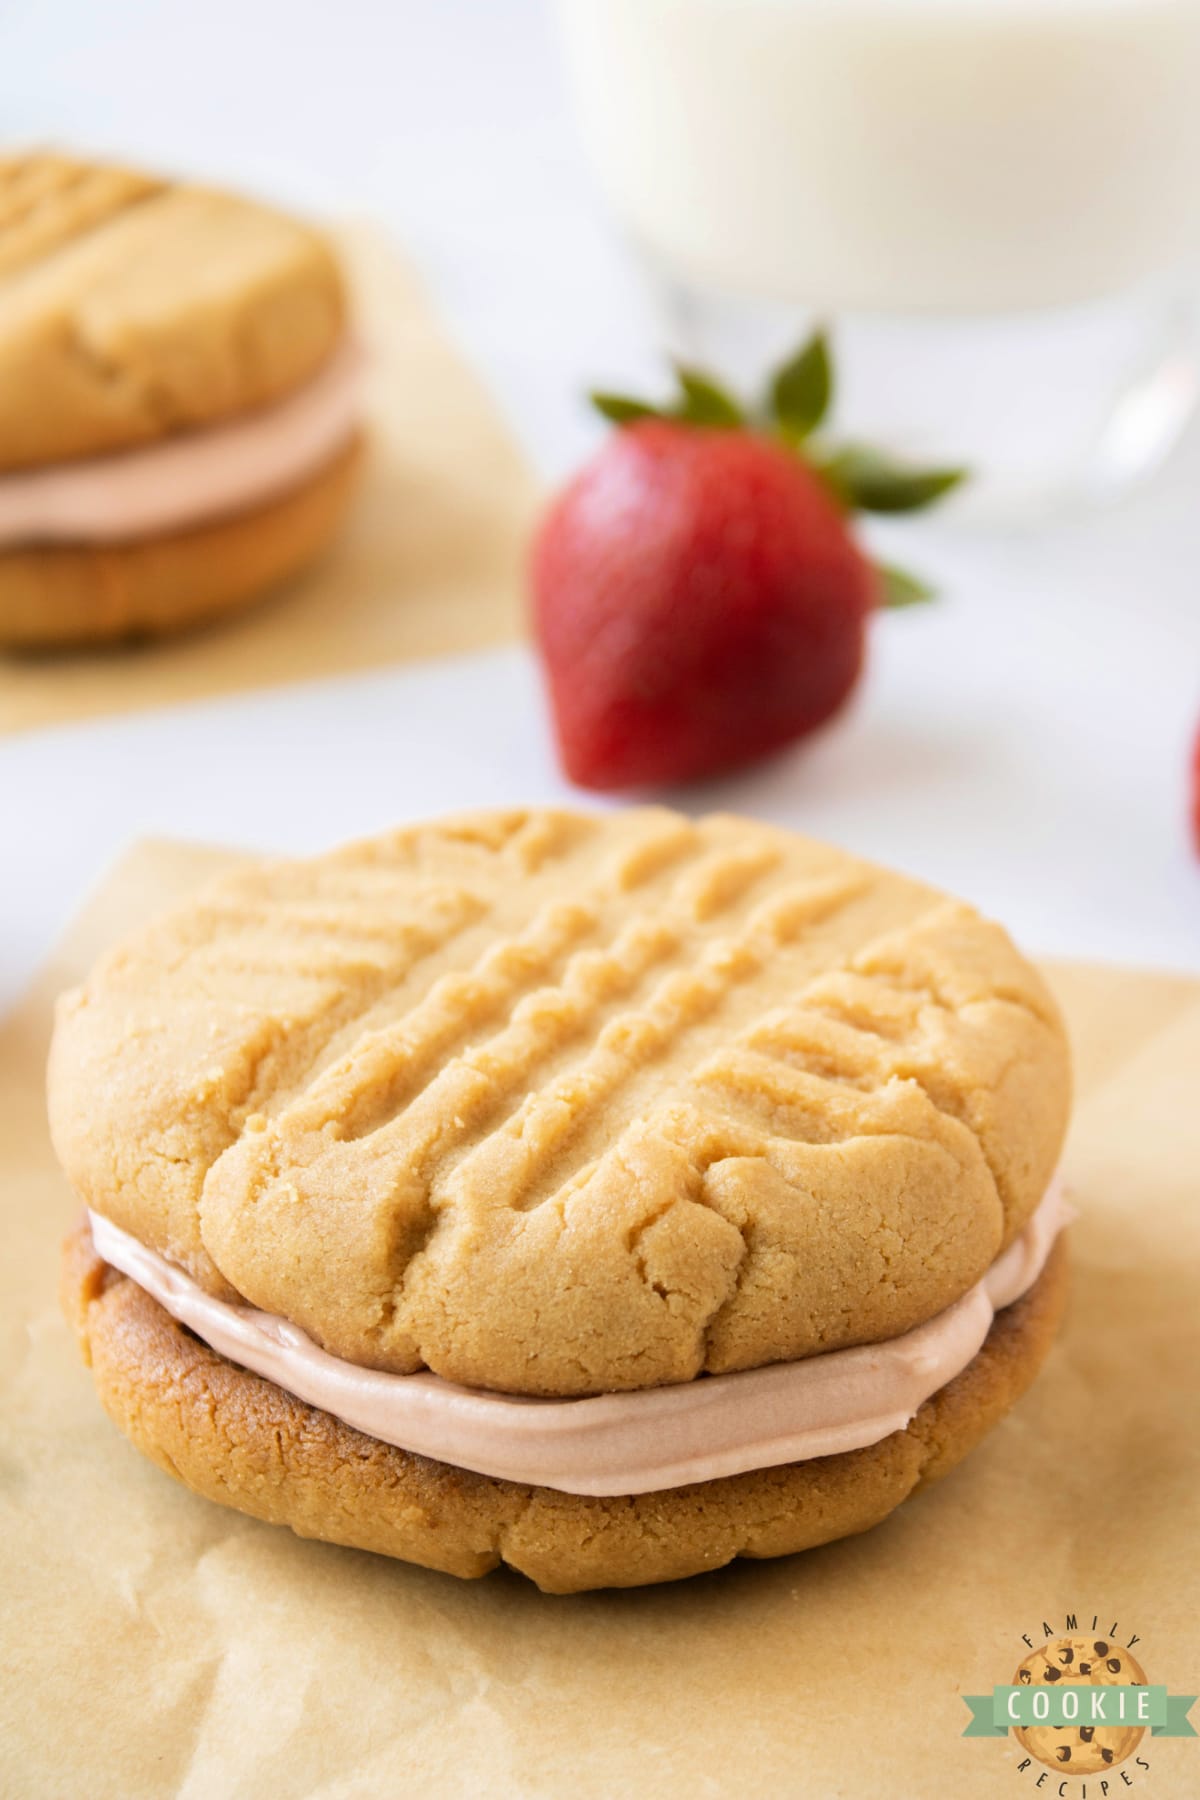 Peanut Butter and Jelly Cookie Sandwiches